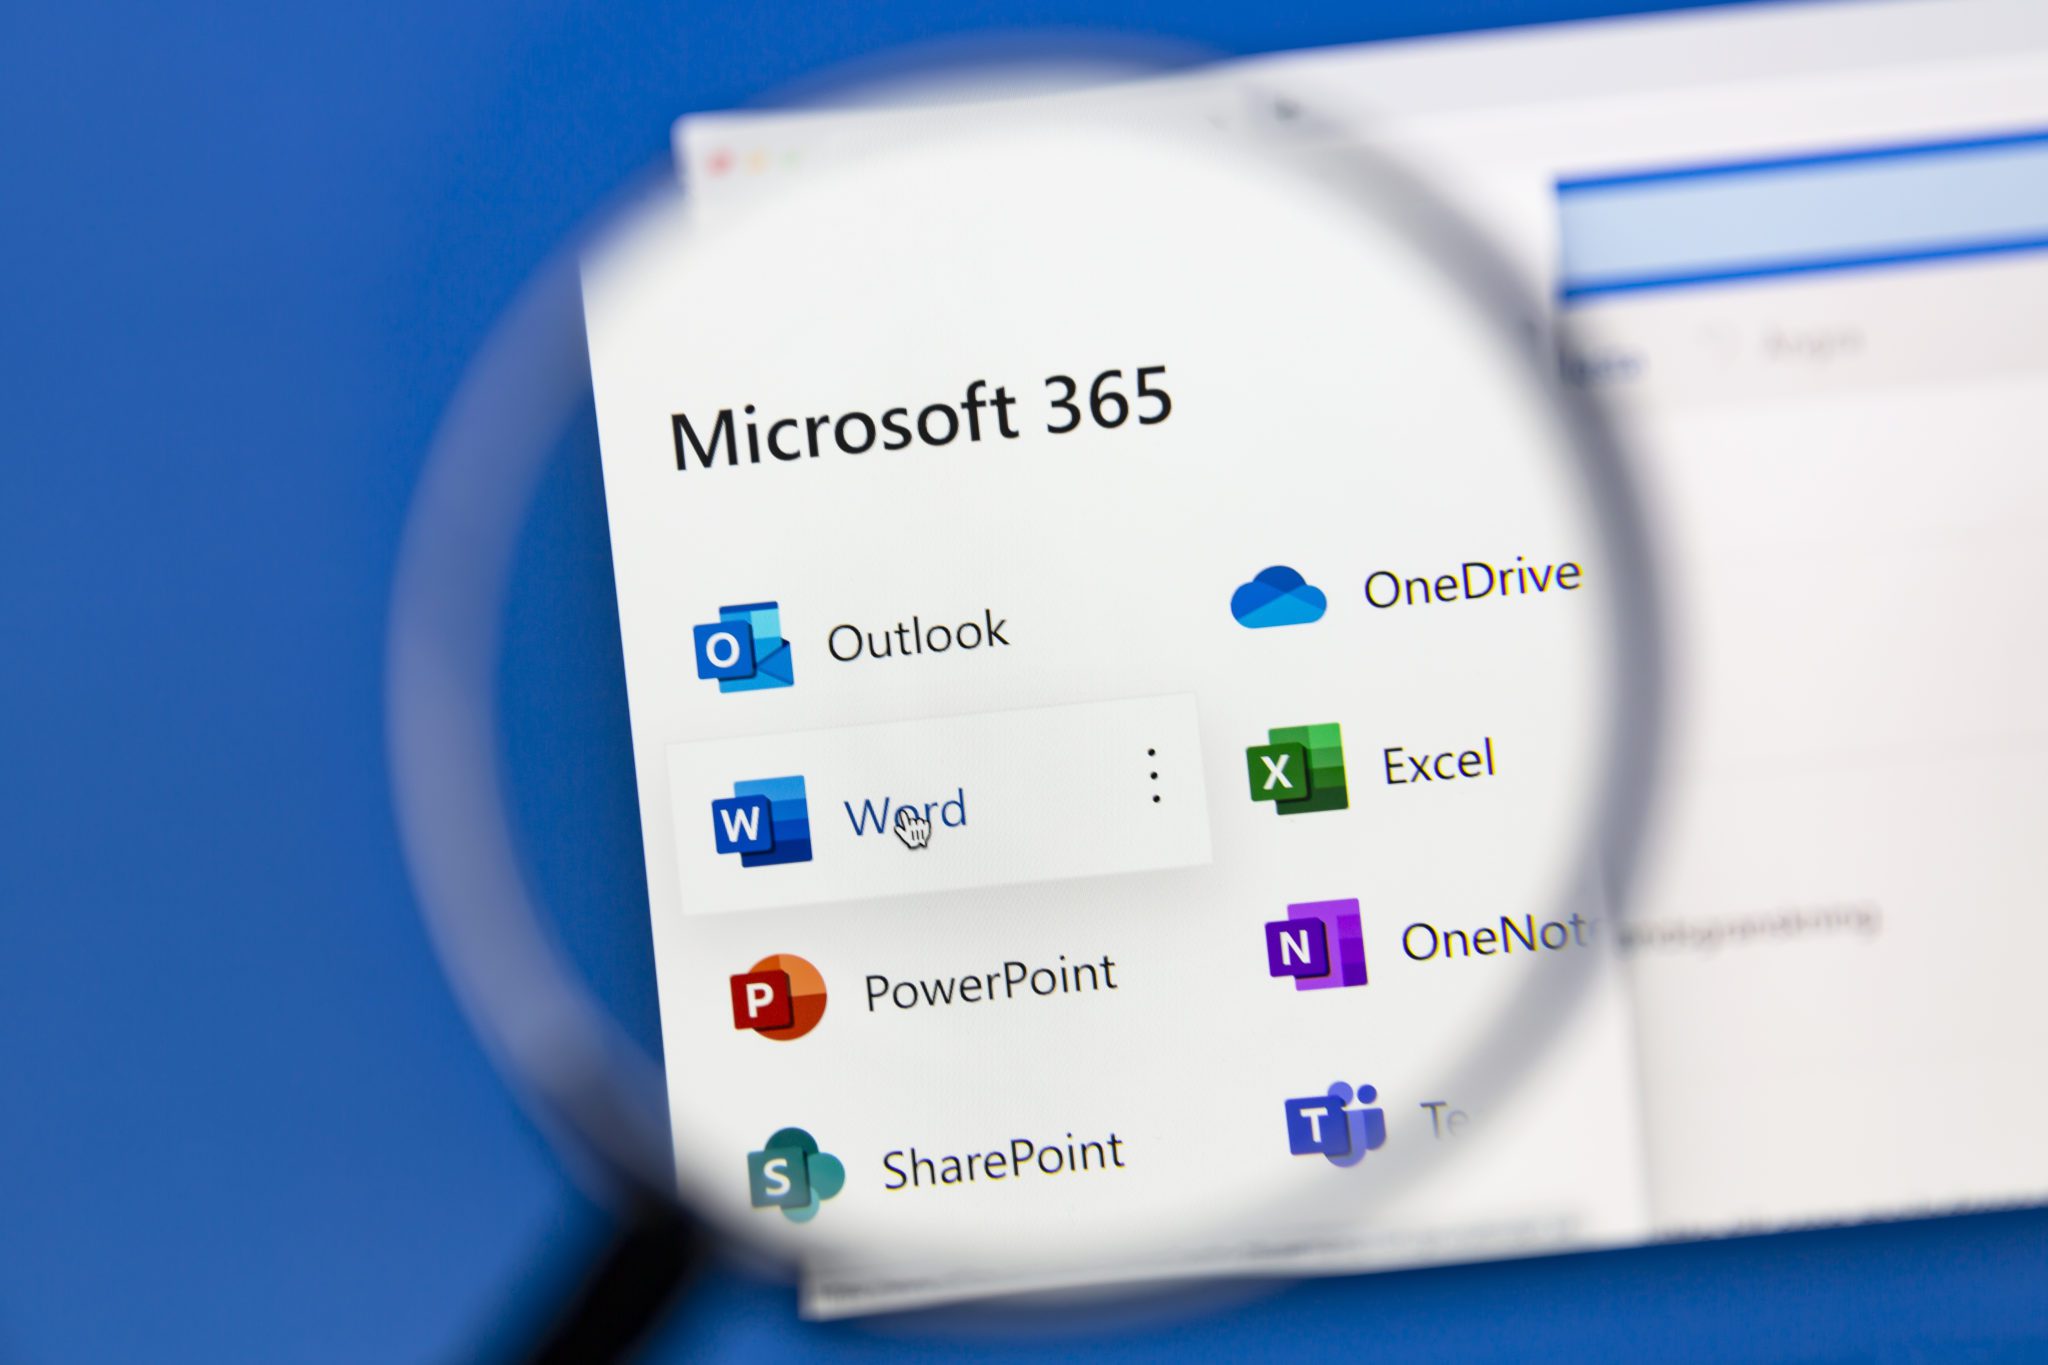 Microsoft 365 web apps on a computer screen